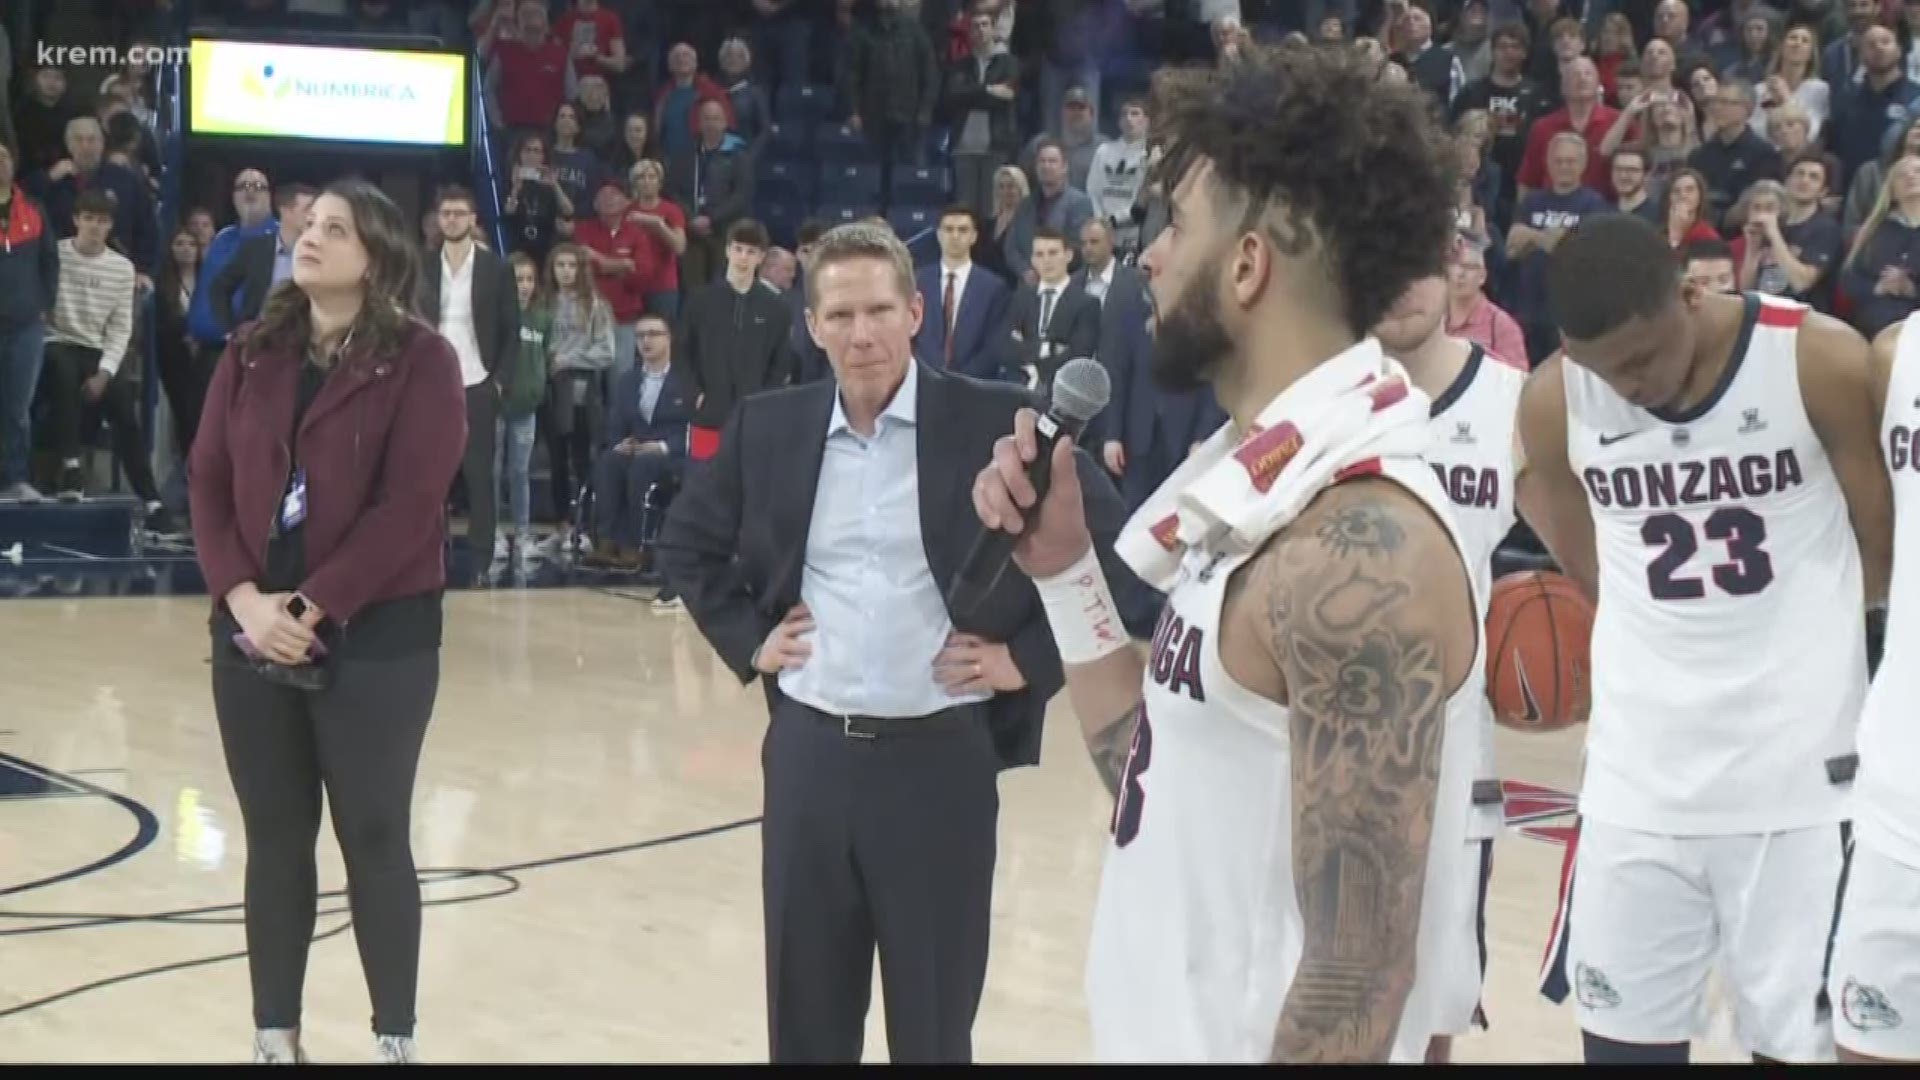 Zags win 102-68 over the Cougars and will likely be number one in the AP Poll on Monday.